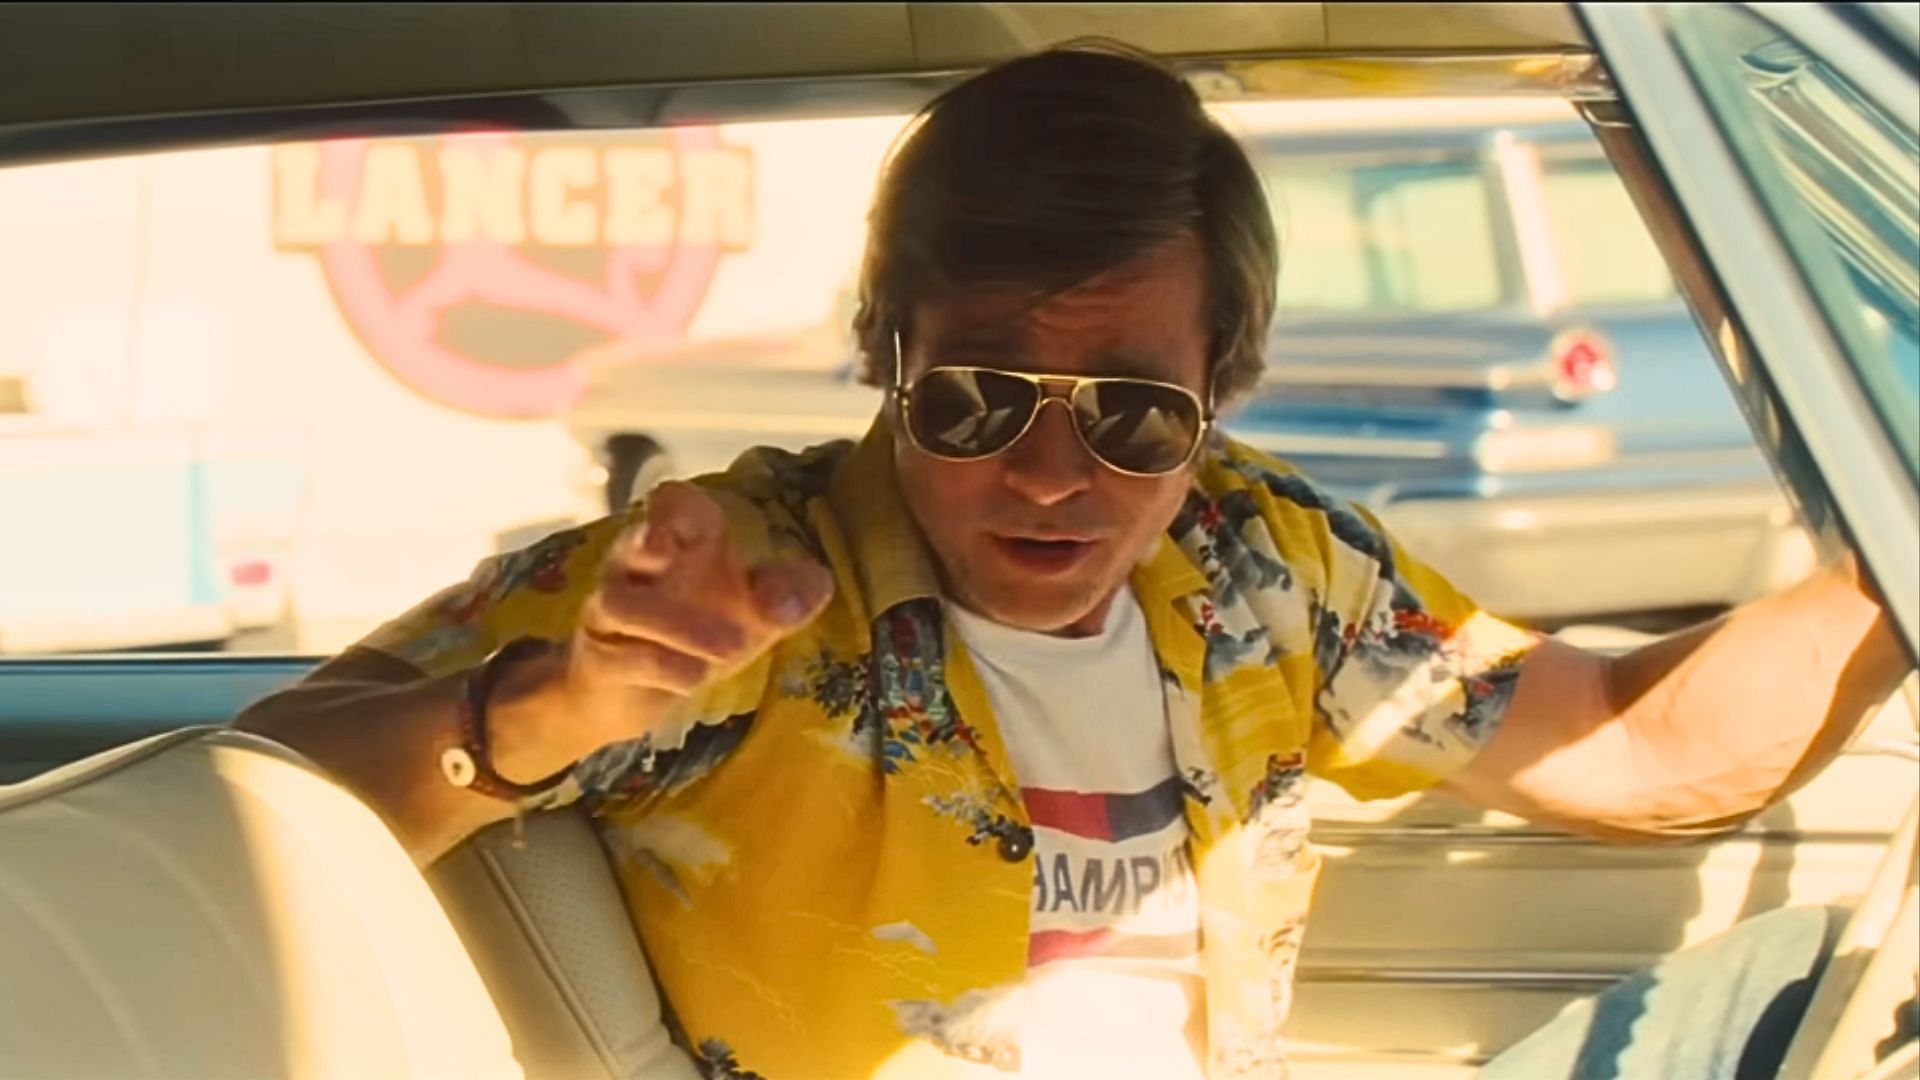 A scene from Once Upon a Time in Hollywood (Image via YouTube/Sony Pictures Entertainment)